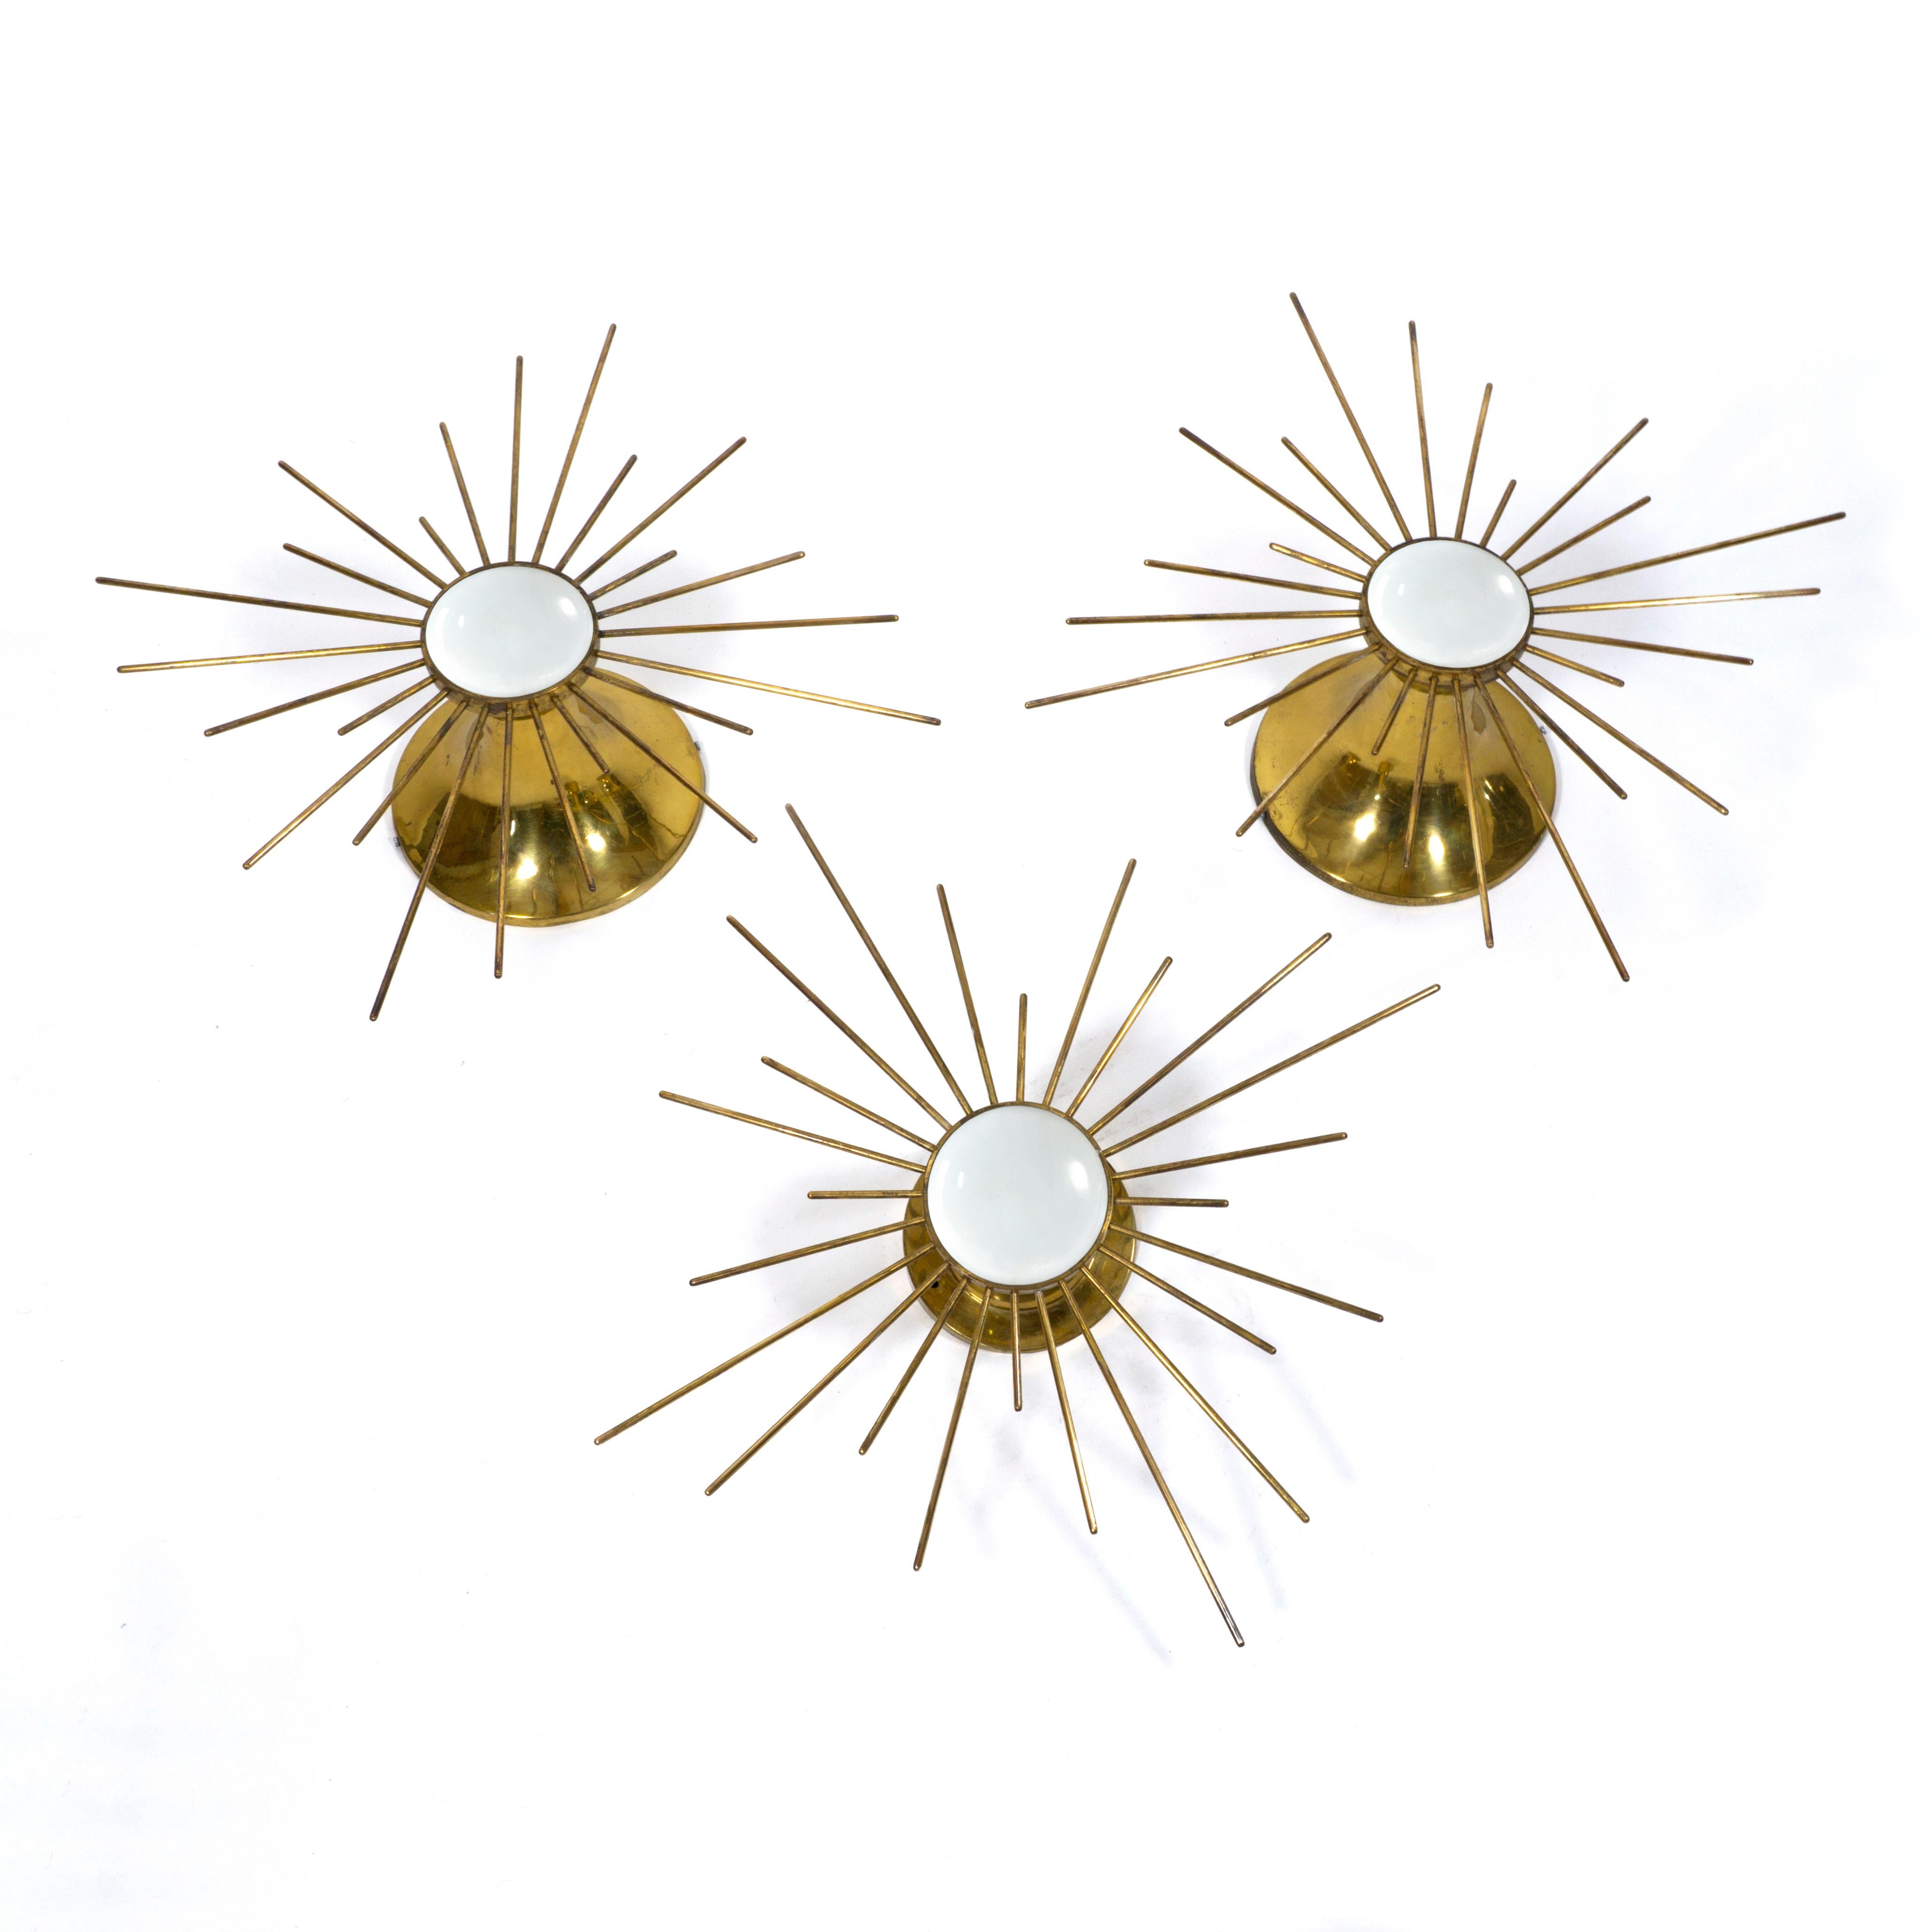 Beautiful set consisting of 3 large Sunburst wall or ceiling lamps  sconces from the 1960s. These stunning lamps are both lighting and sculpture. They used to hang in a bavarian church.
Very beautiful design with high quality finish. E27 socket.